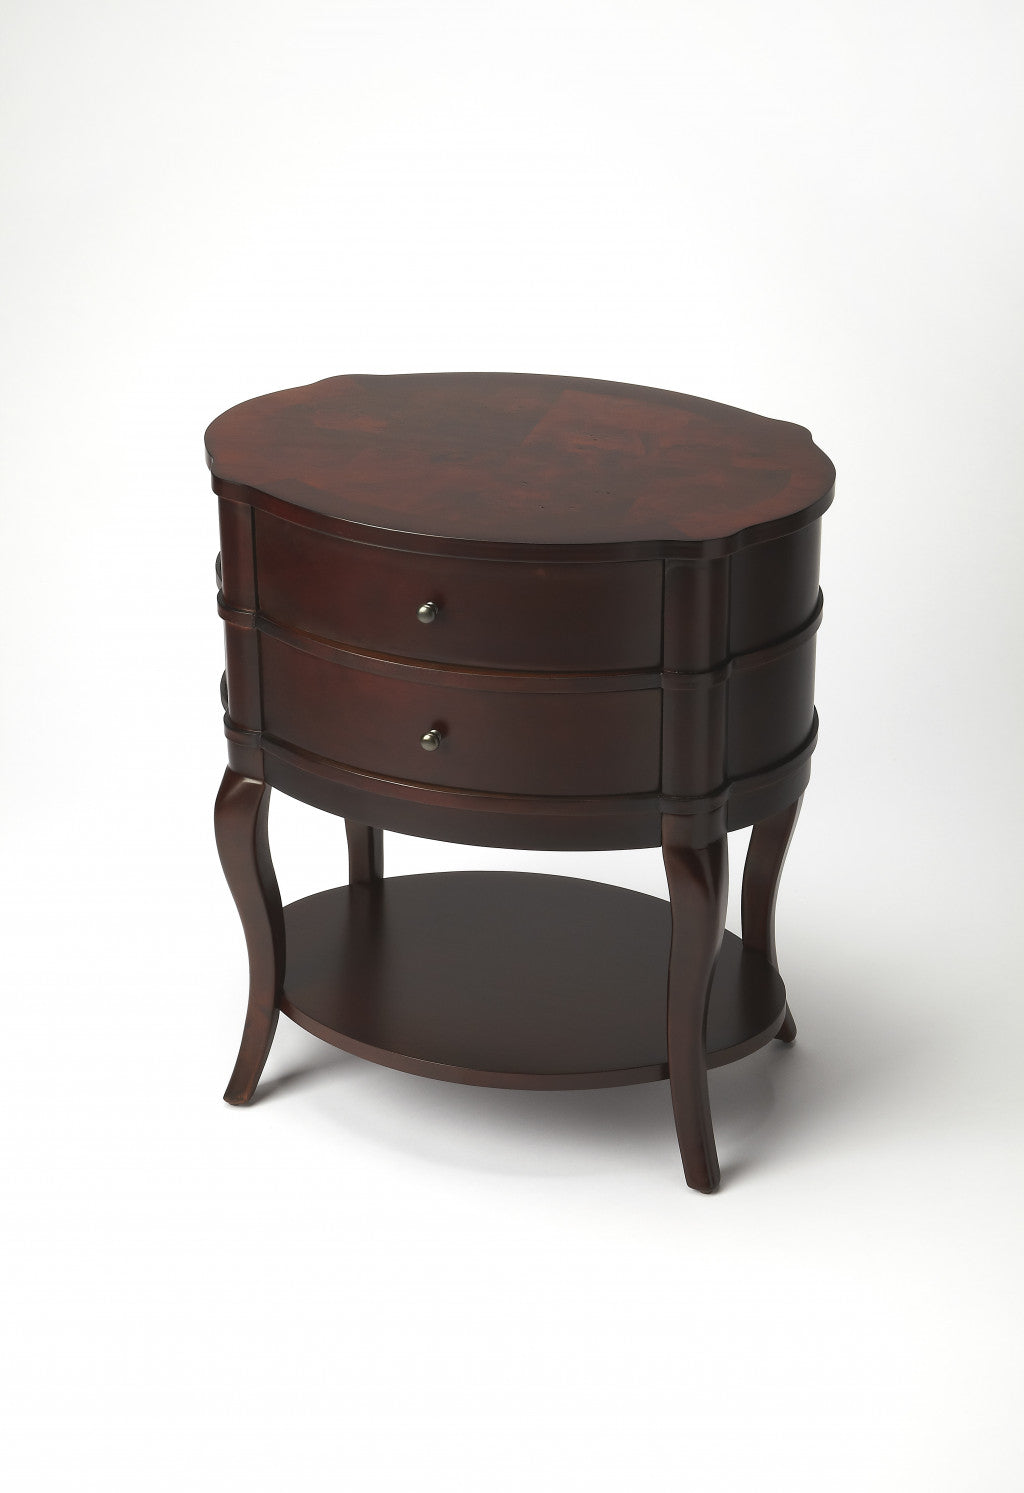 26" Dark Brown And Cherry Solid And Manufactured Wood Oval End Table With Two Drawers And Shelf